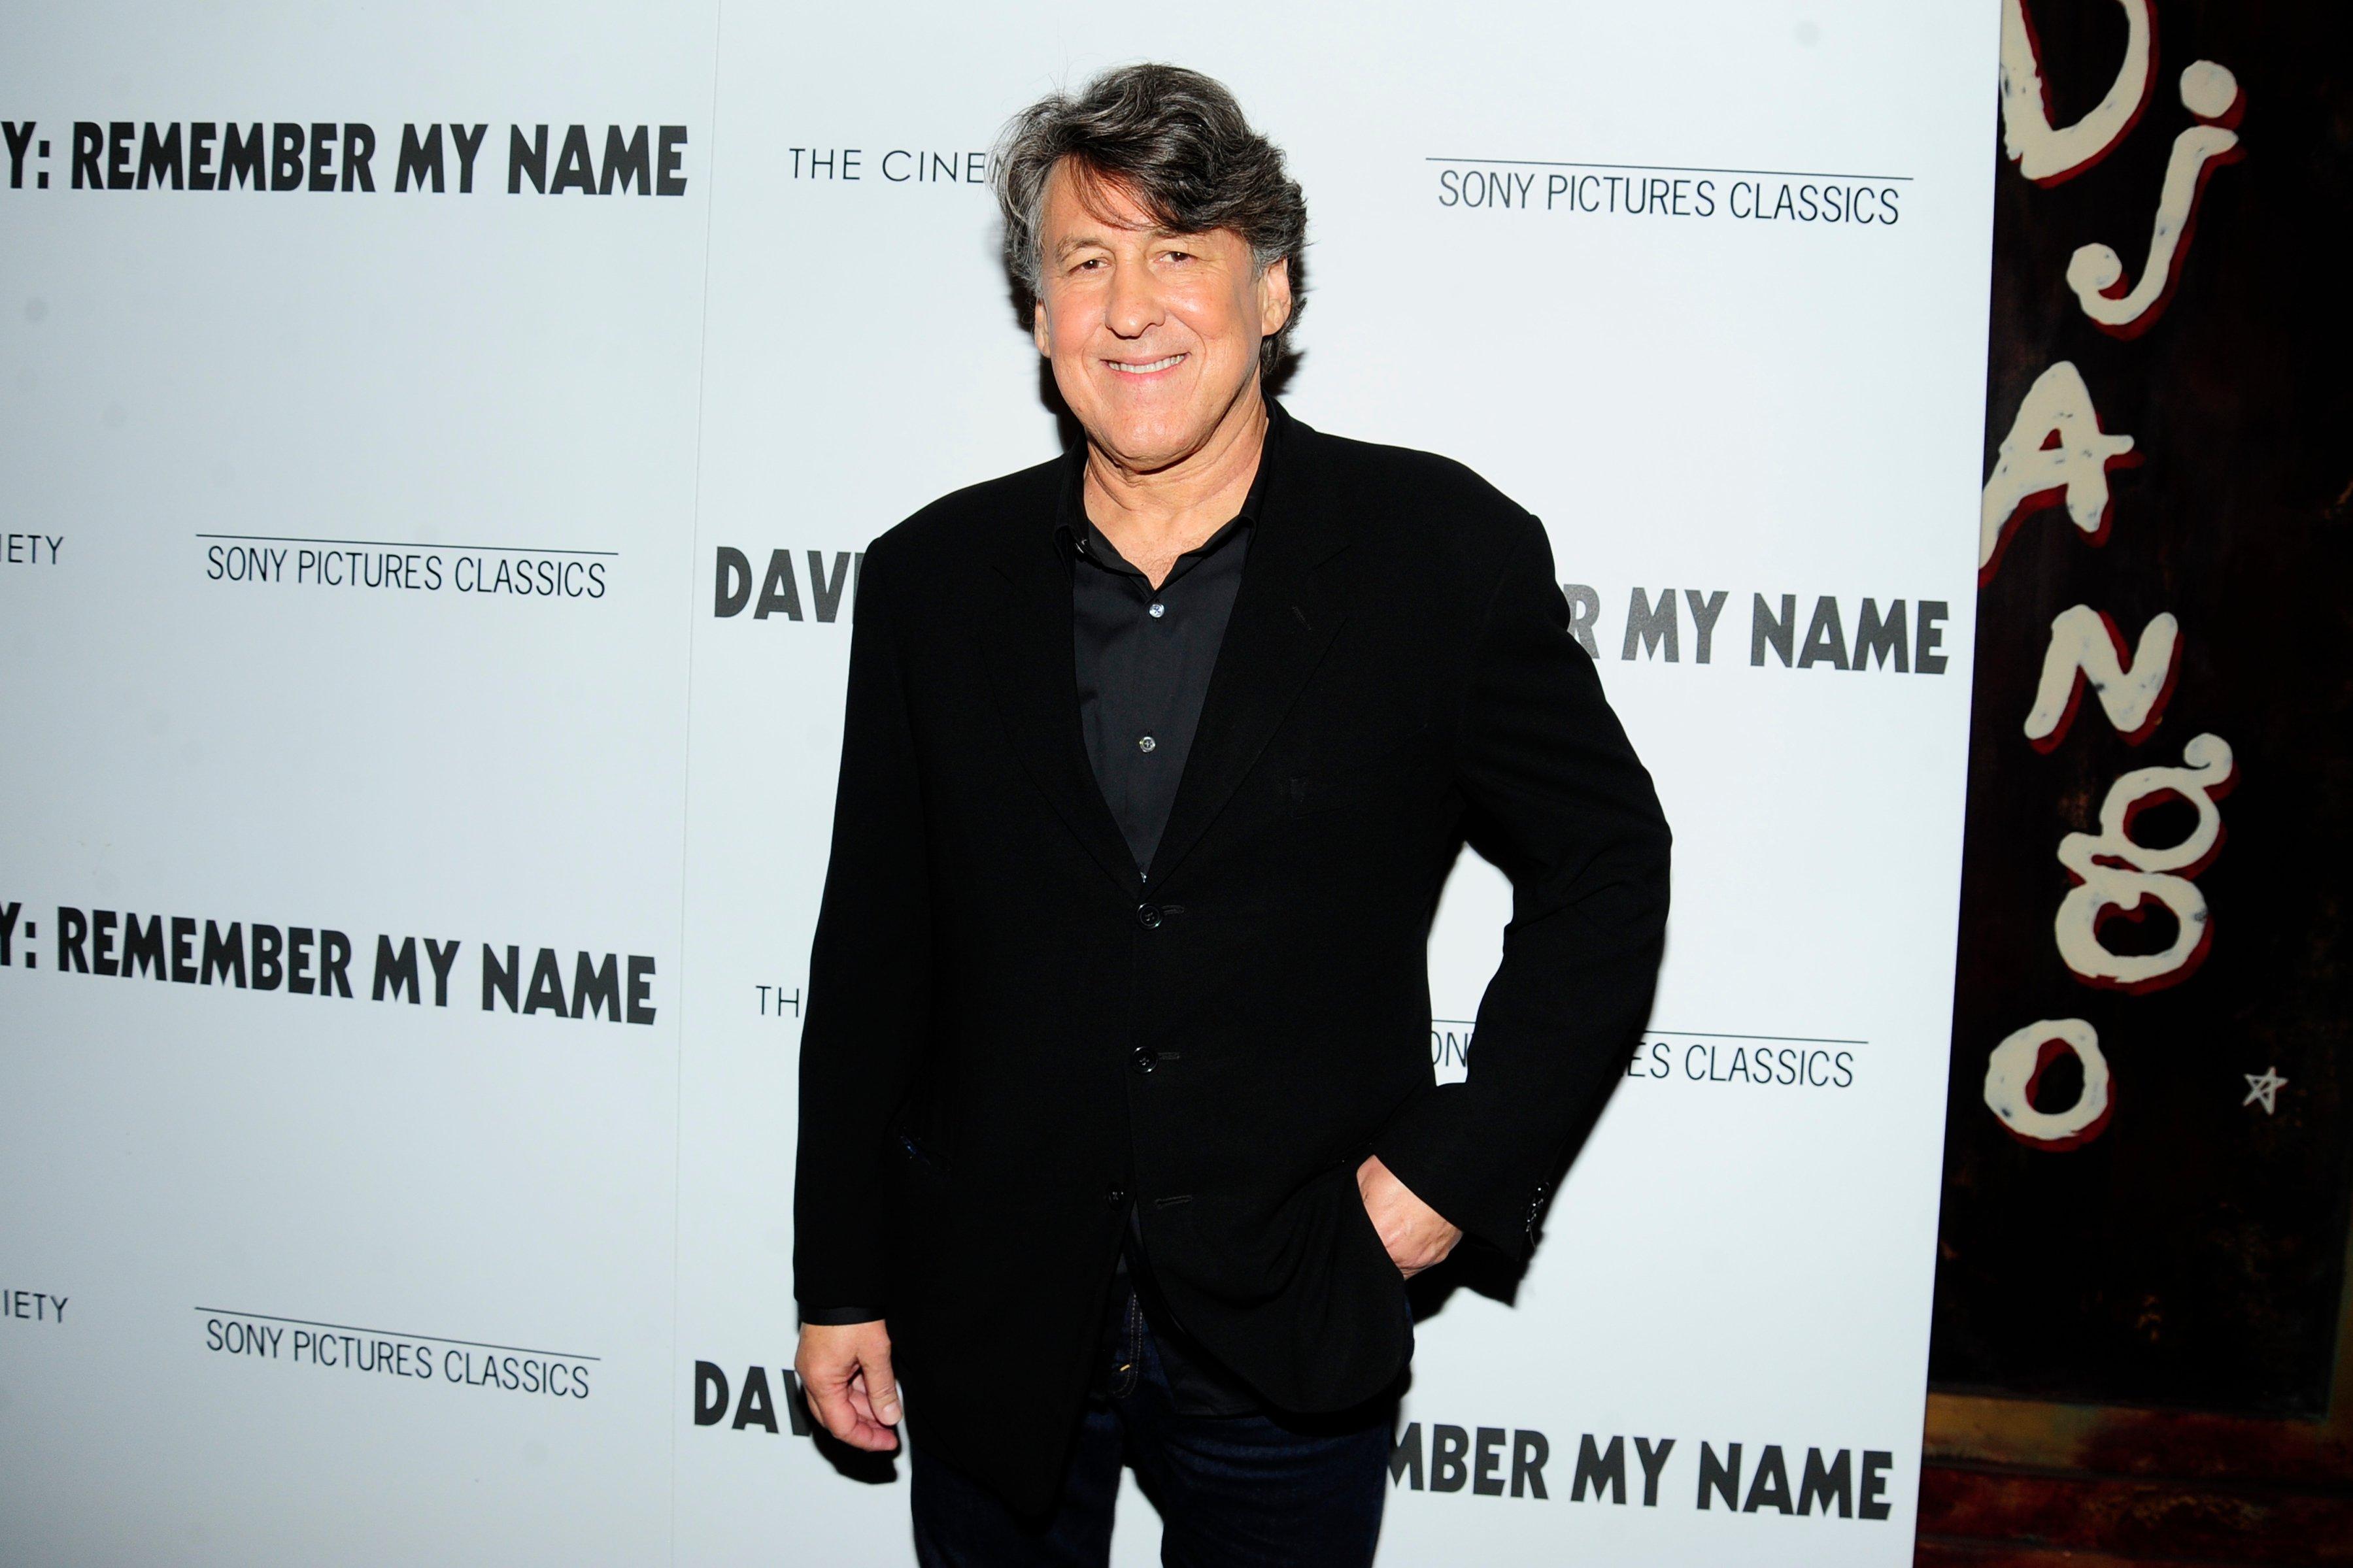 Photo of Cameron Crowe attending a screening of 'David Crosby: Remember My Name' in 2019